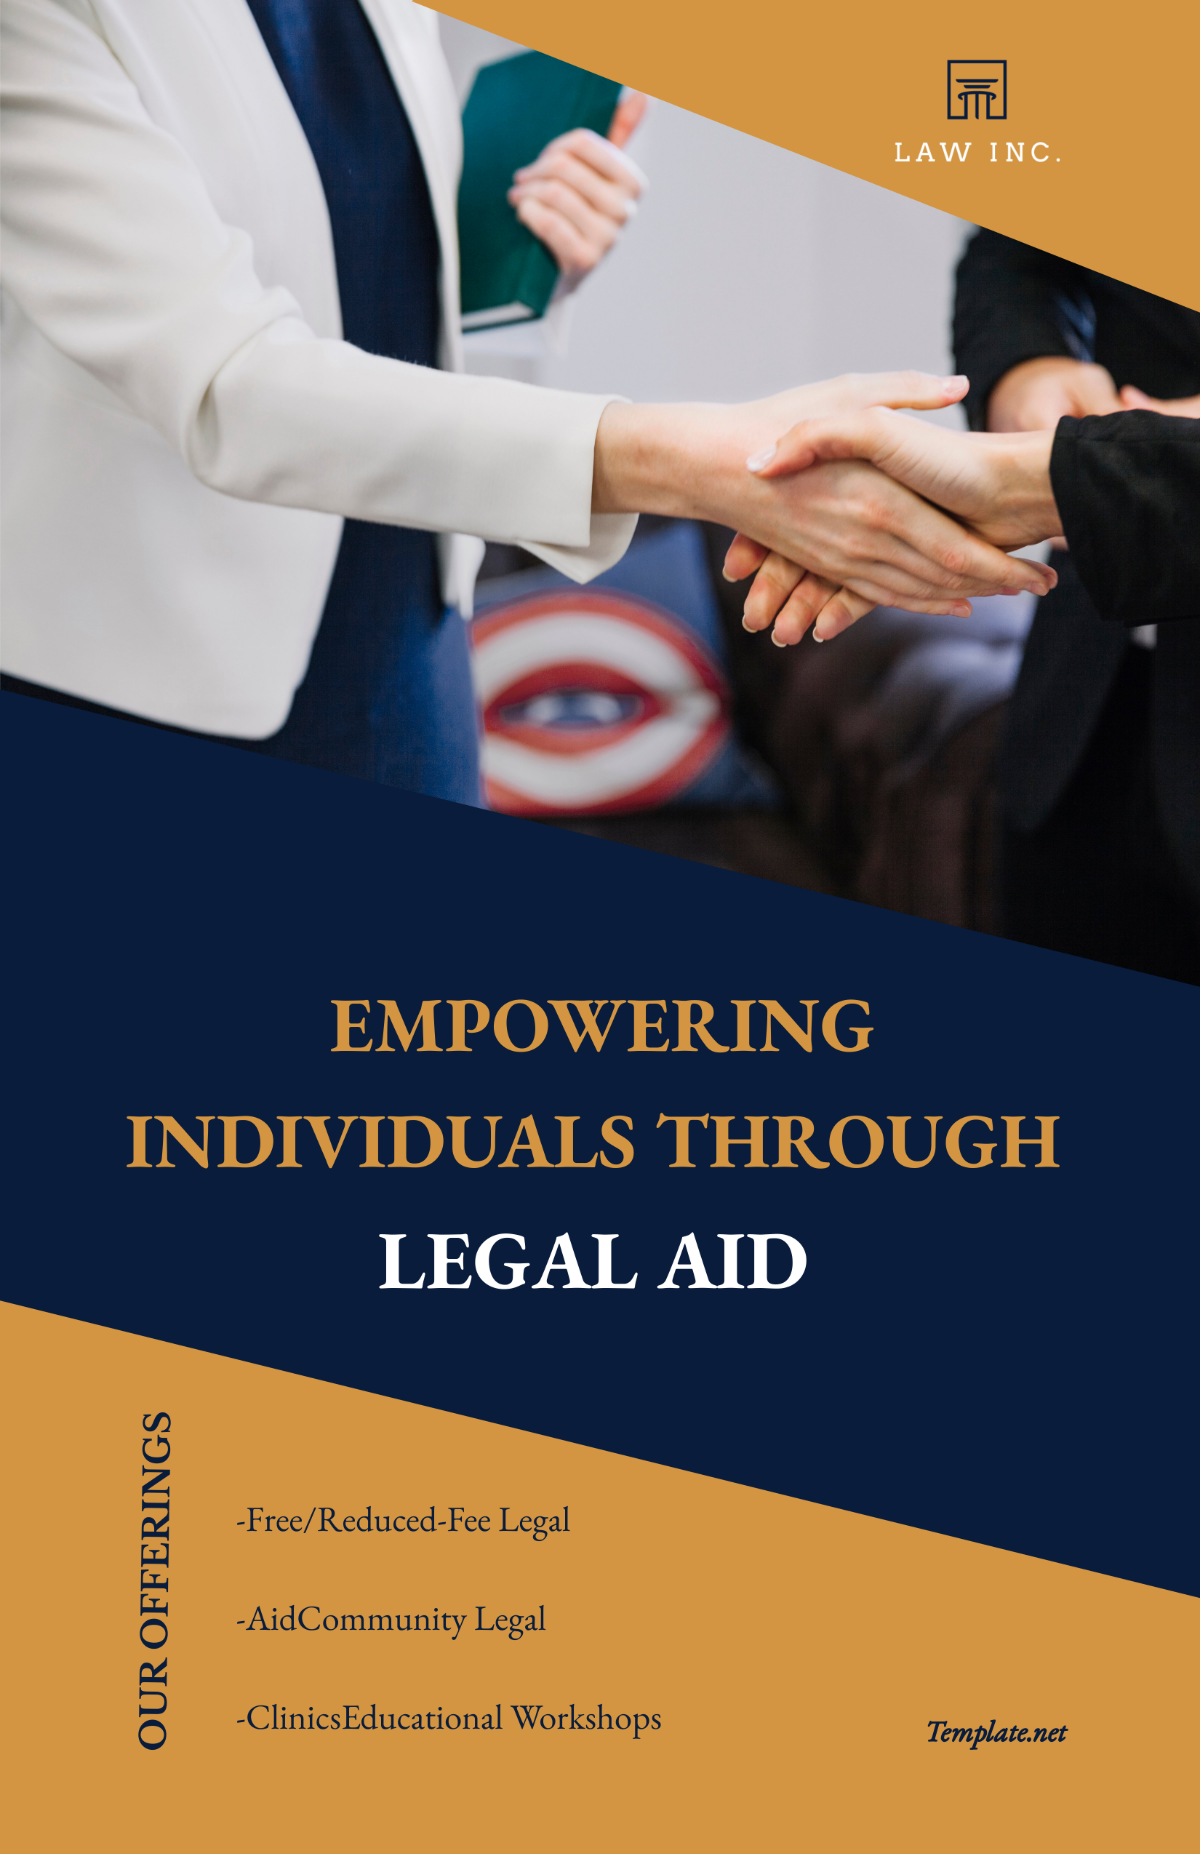 Law Firm Legal Aid Poster